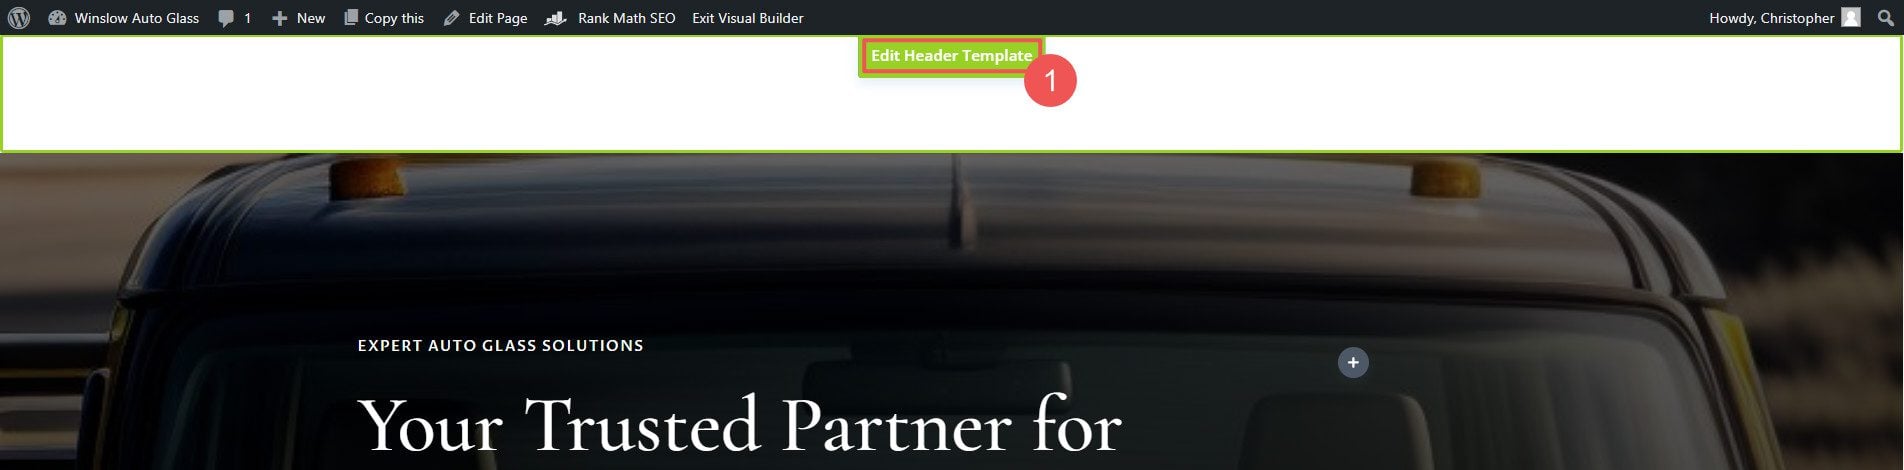 Edit Header Template from Home Page Visual Builder